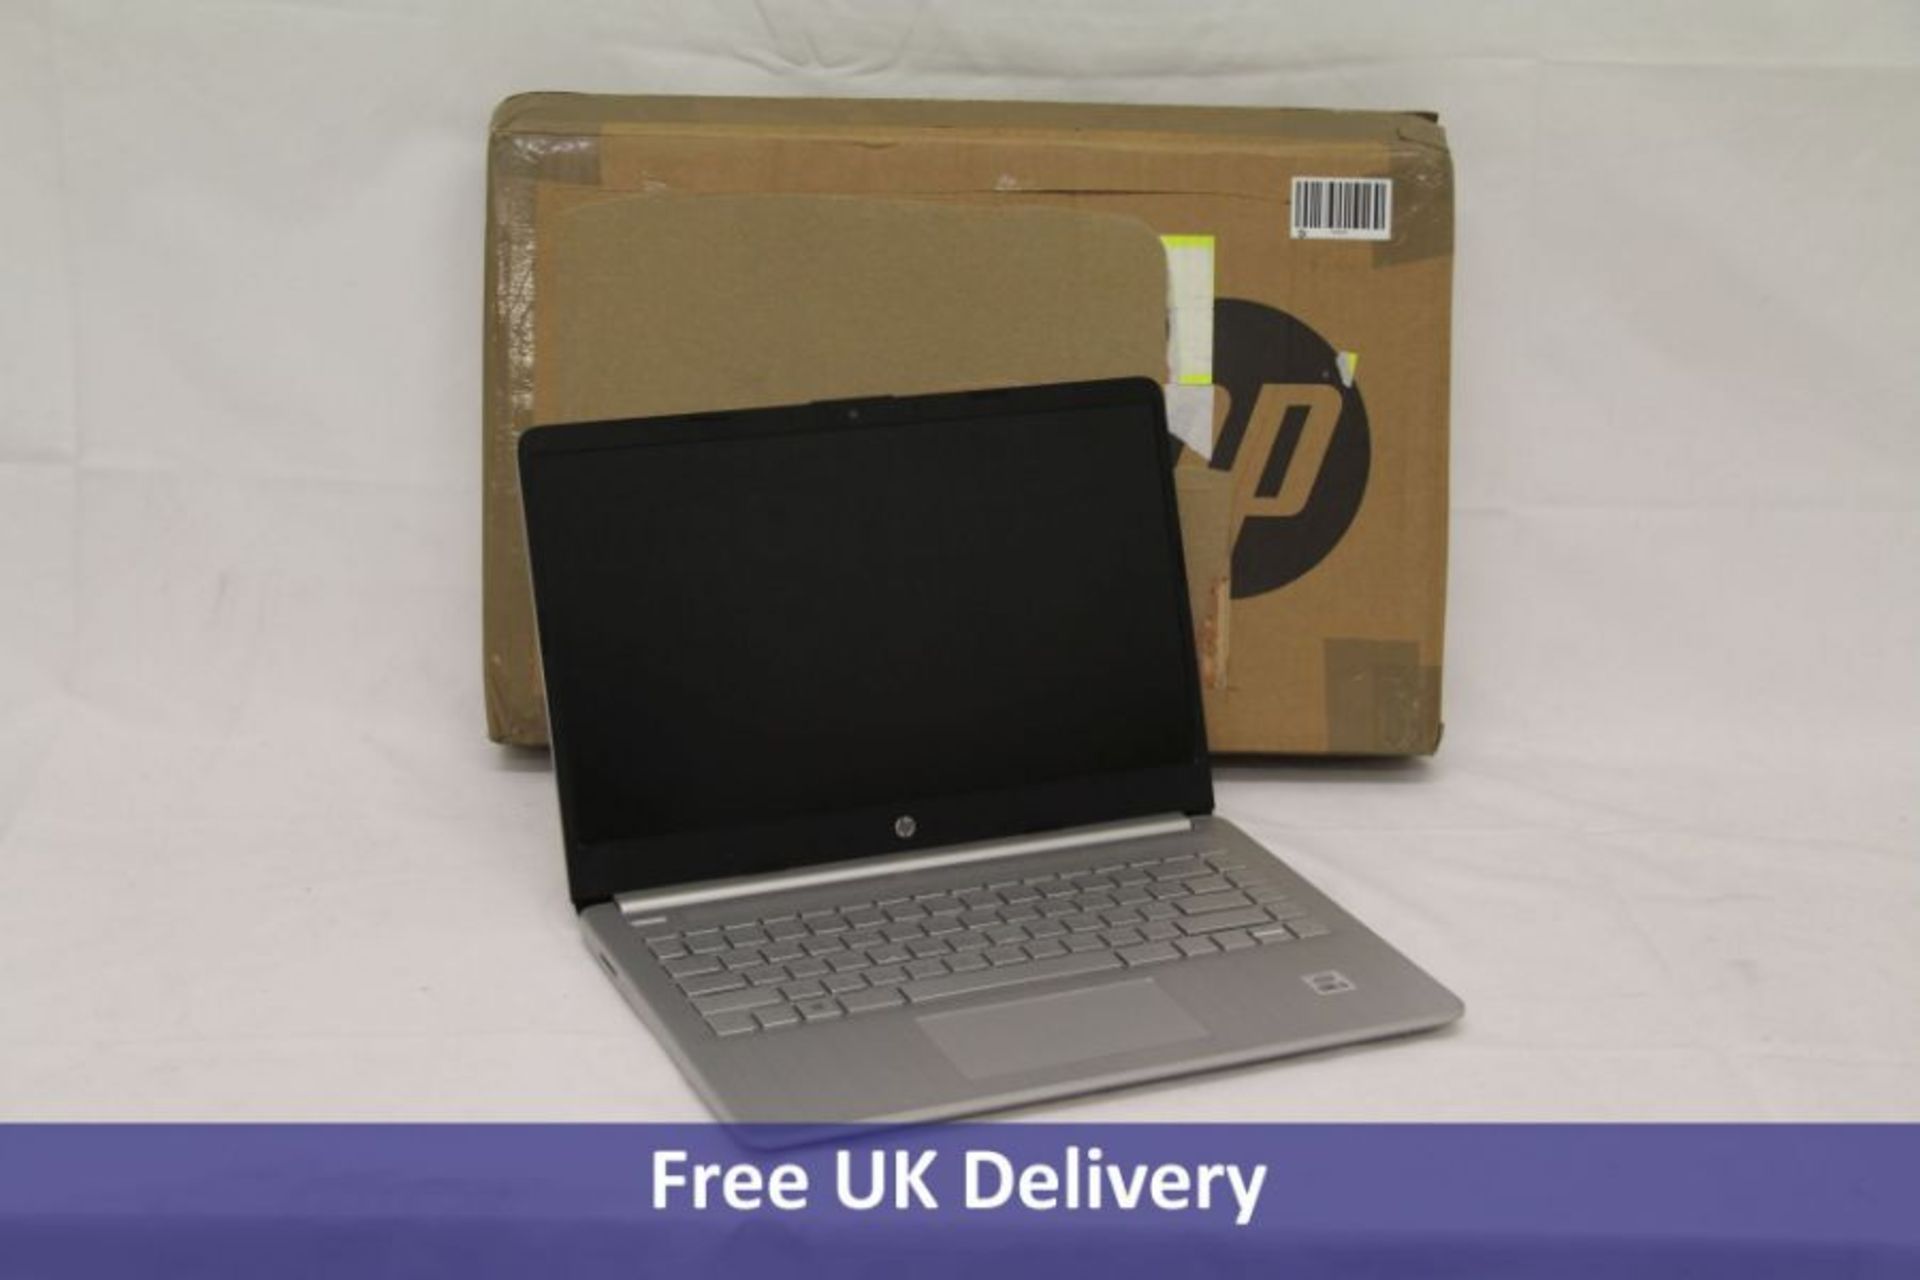 HP 14s-dq1xxx Laptop, Core i5-1035G1, 8GB RAM, Windows 10. Used, boxed with power supply